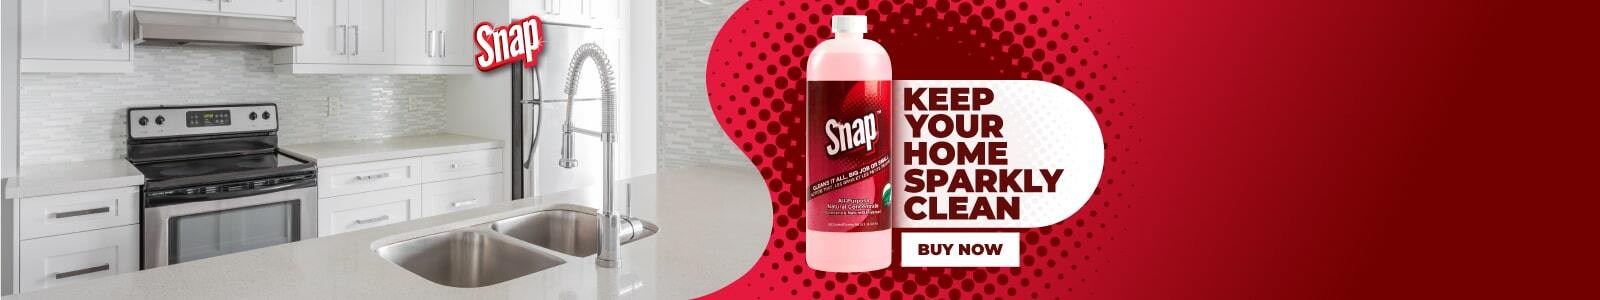 Snap Keep your home sparkly clean Buy now